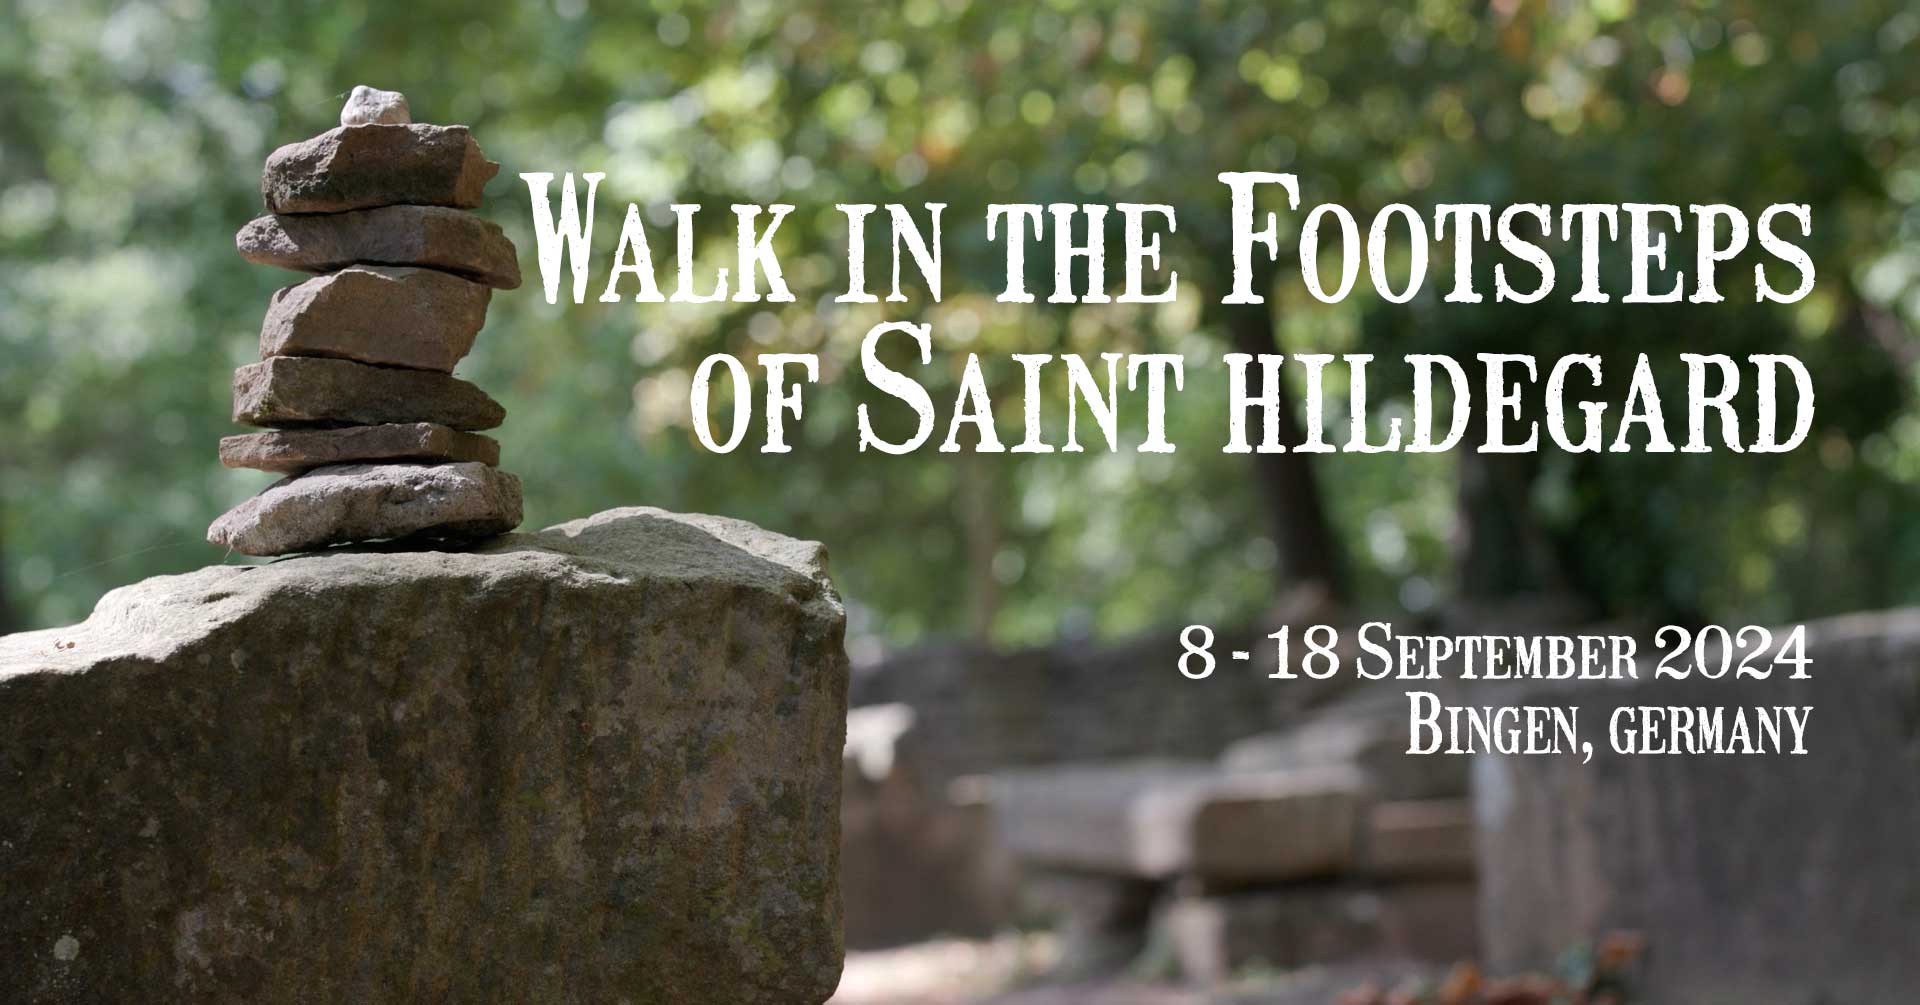 Announcemnt to Walk in the Footsteps of St. Hildegard from September 8018, 2024